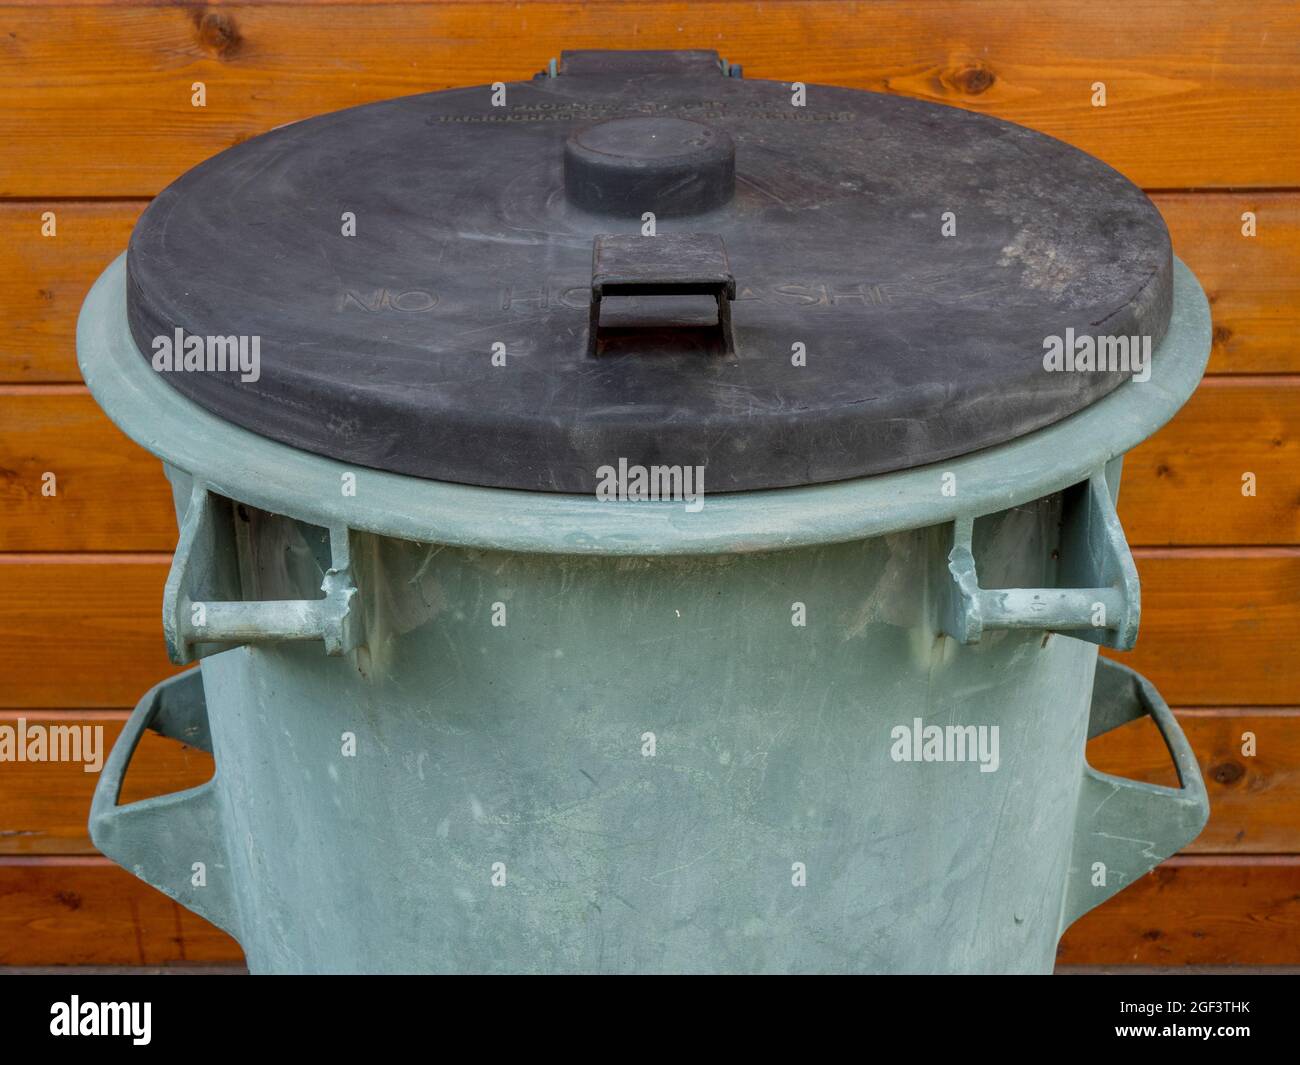 An old domestic household dustbin from 1973, with Property of City of Birmingham Salvage Department, in raised lettering on the lid. Stock Photo